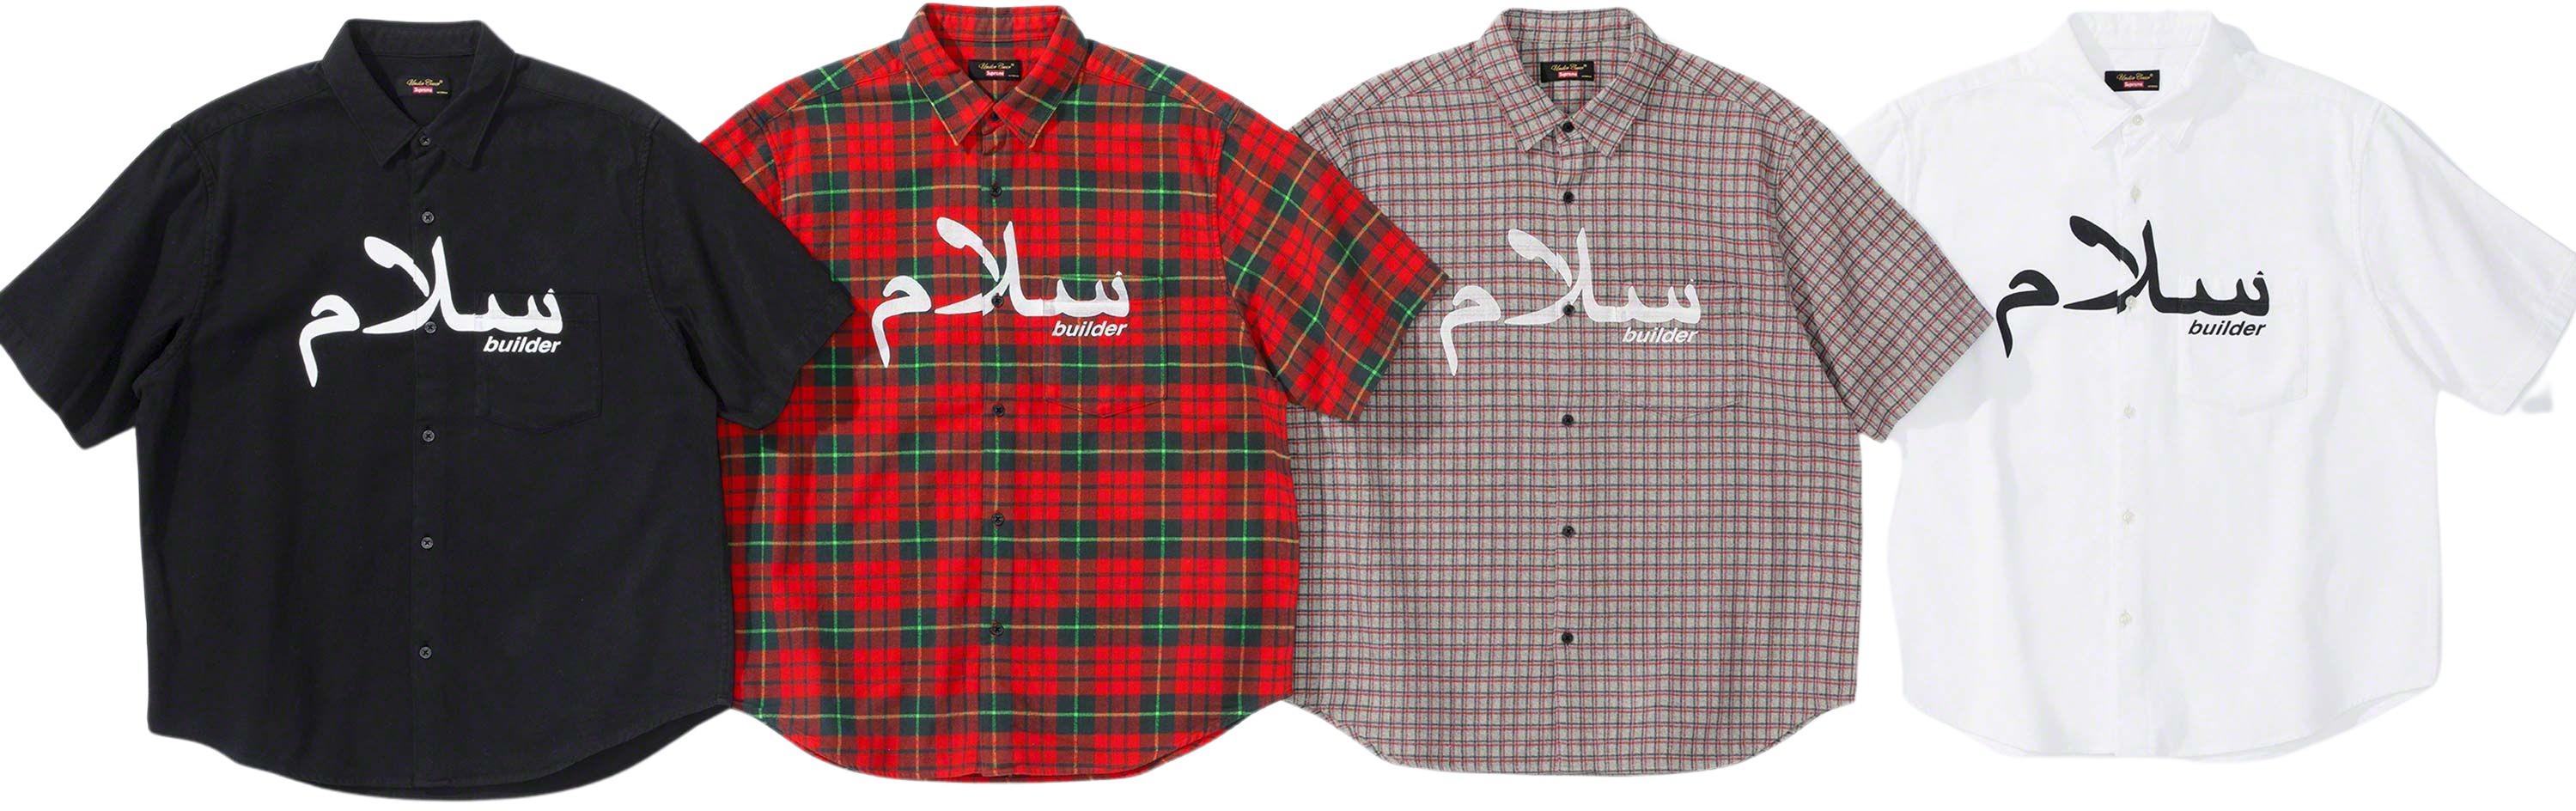 S☆Supreme®/UNDERCOVER S/S Flannel Shirt